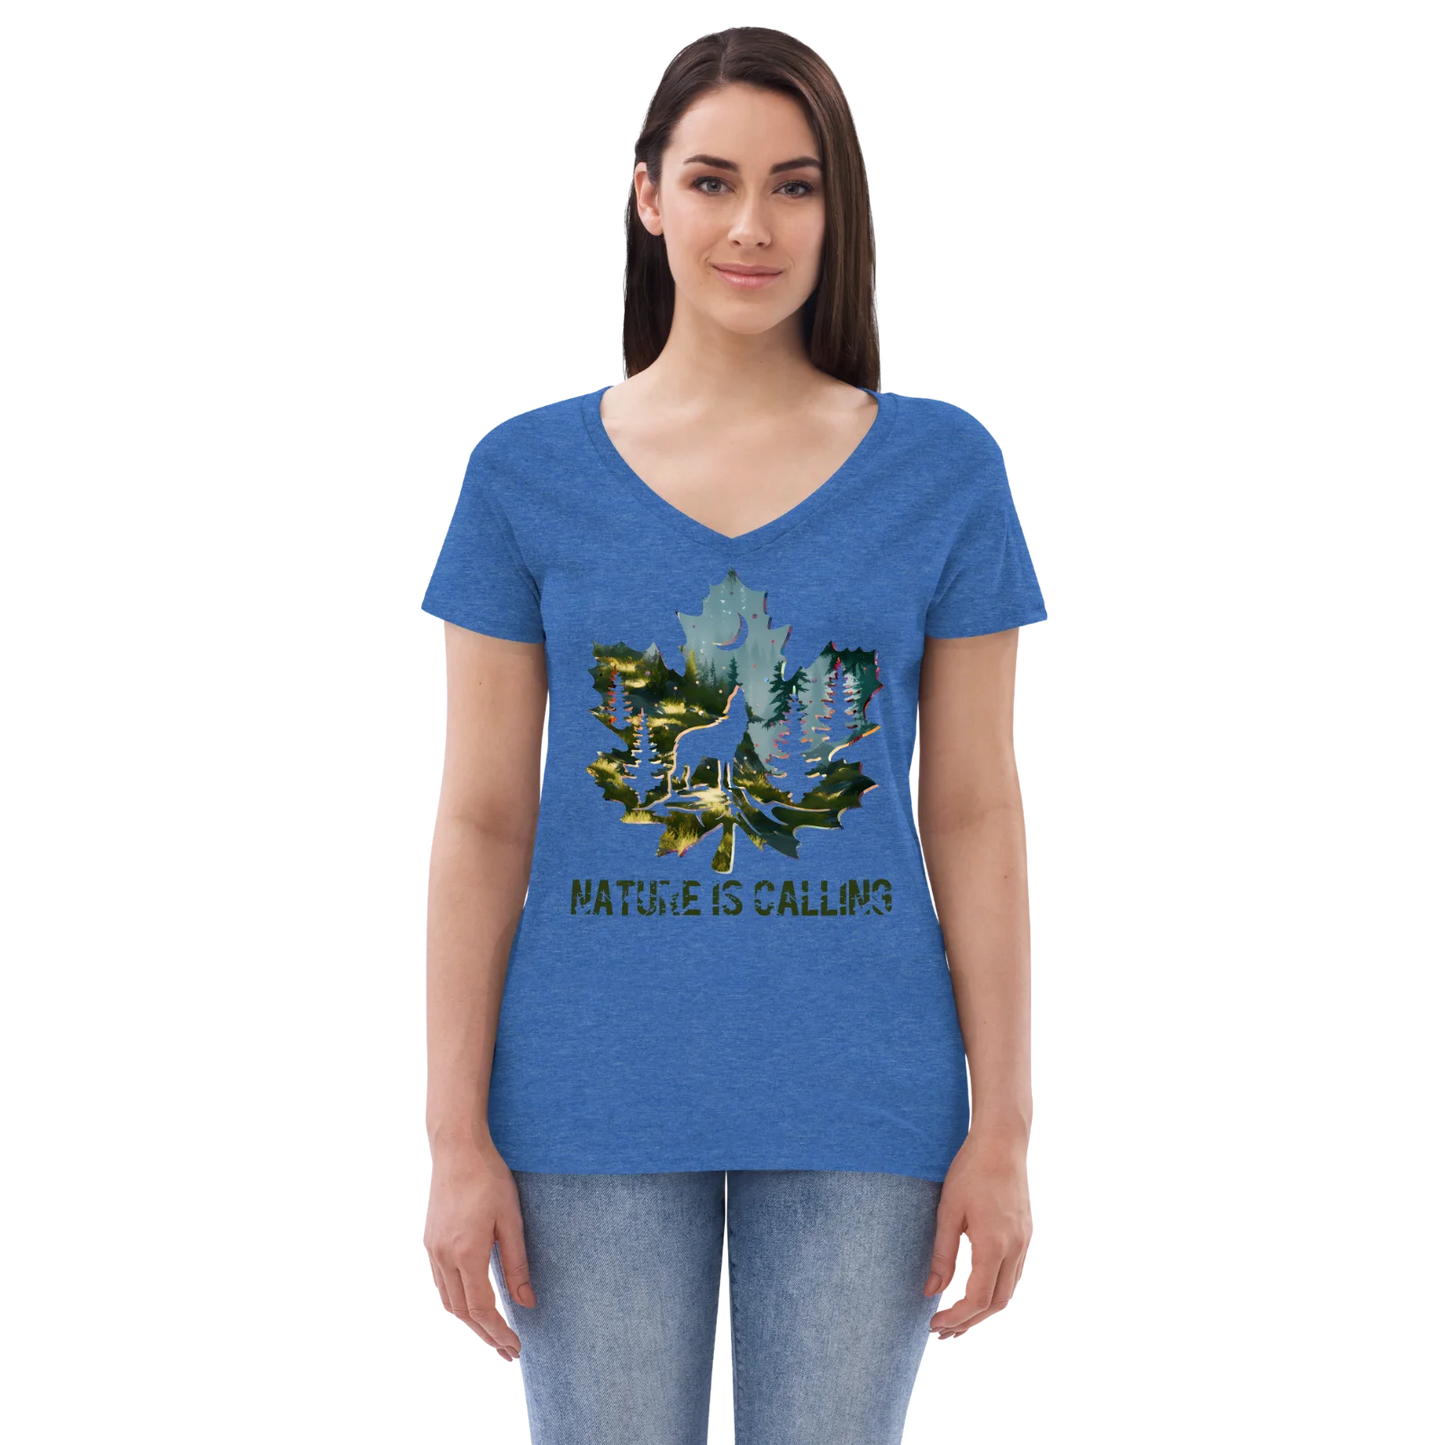 "Nature is calling" Recycled V-neck T-shirt